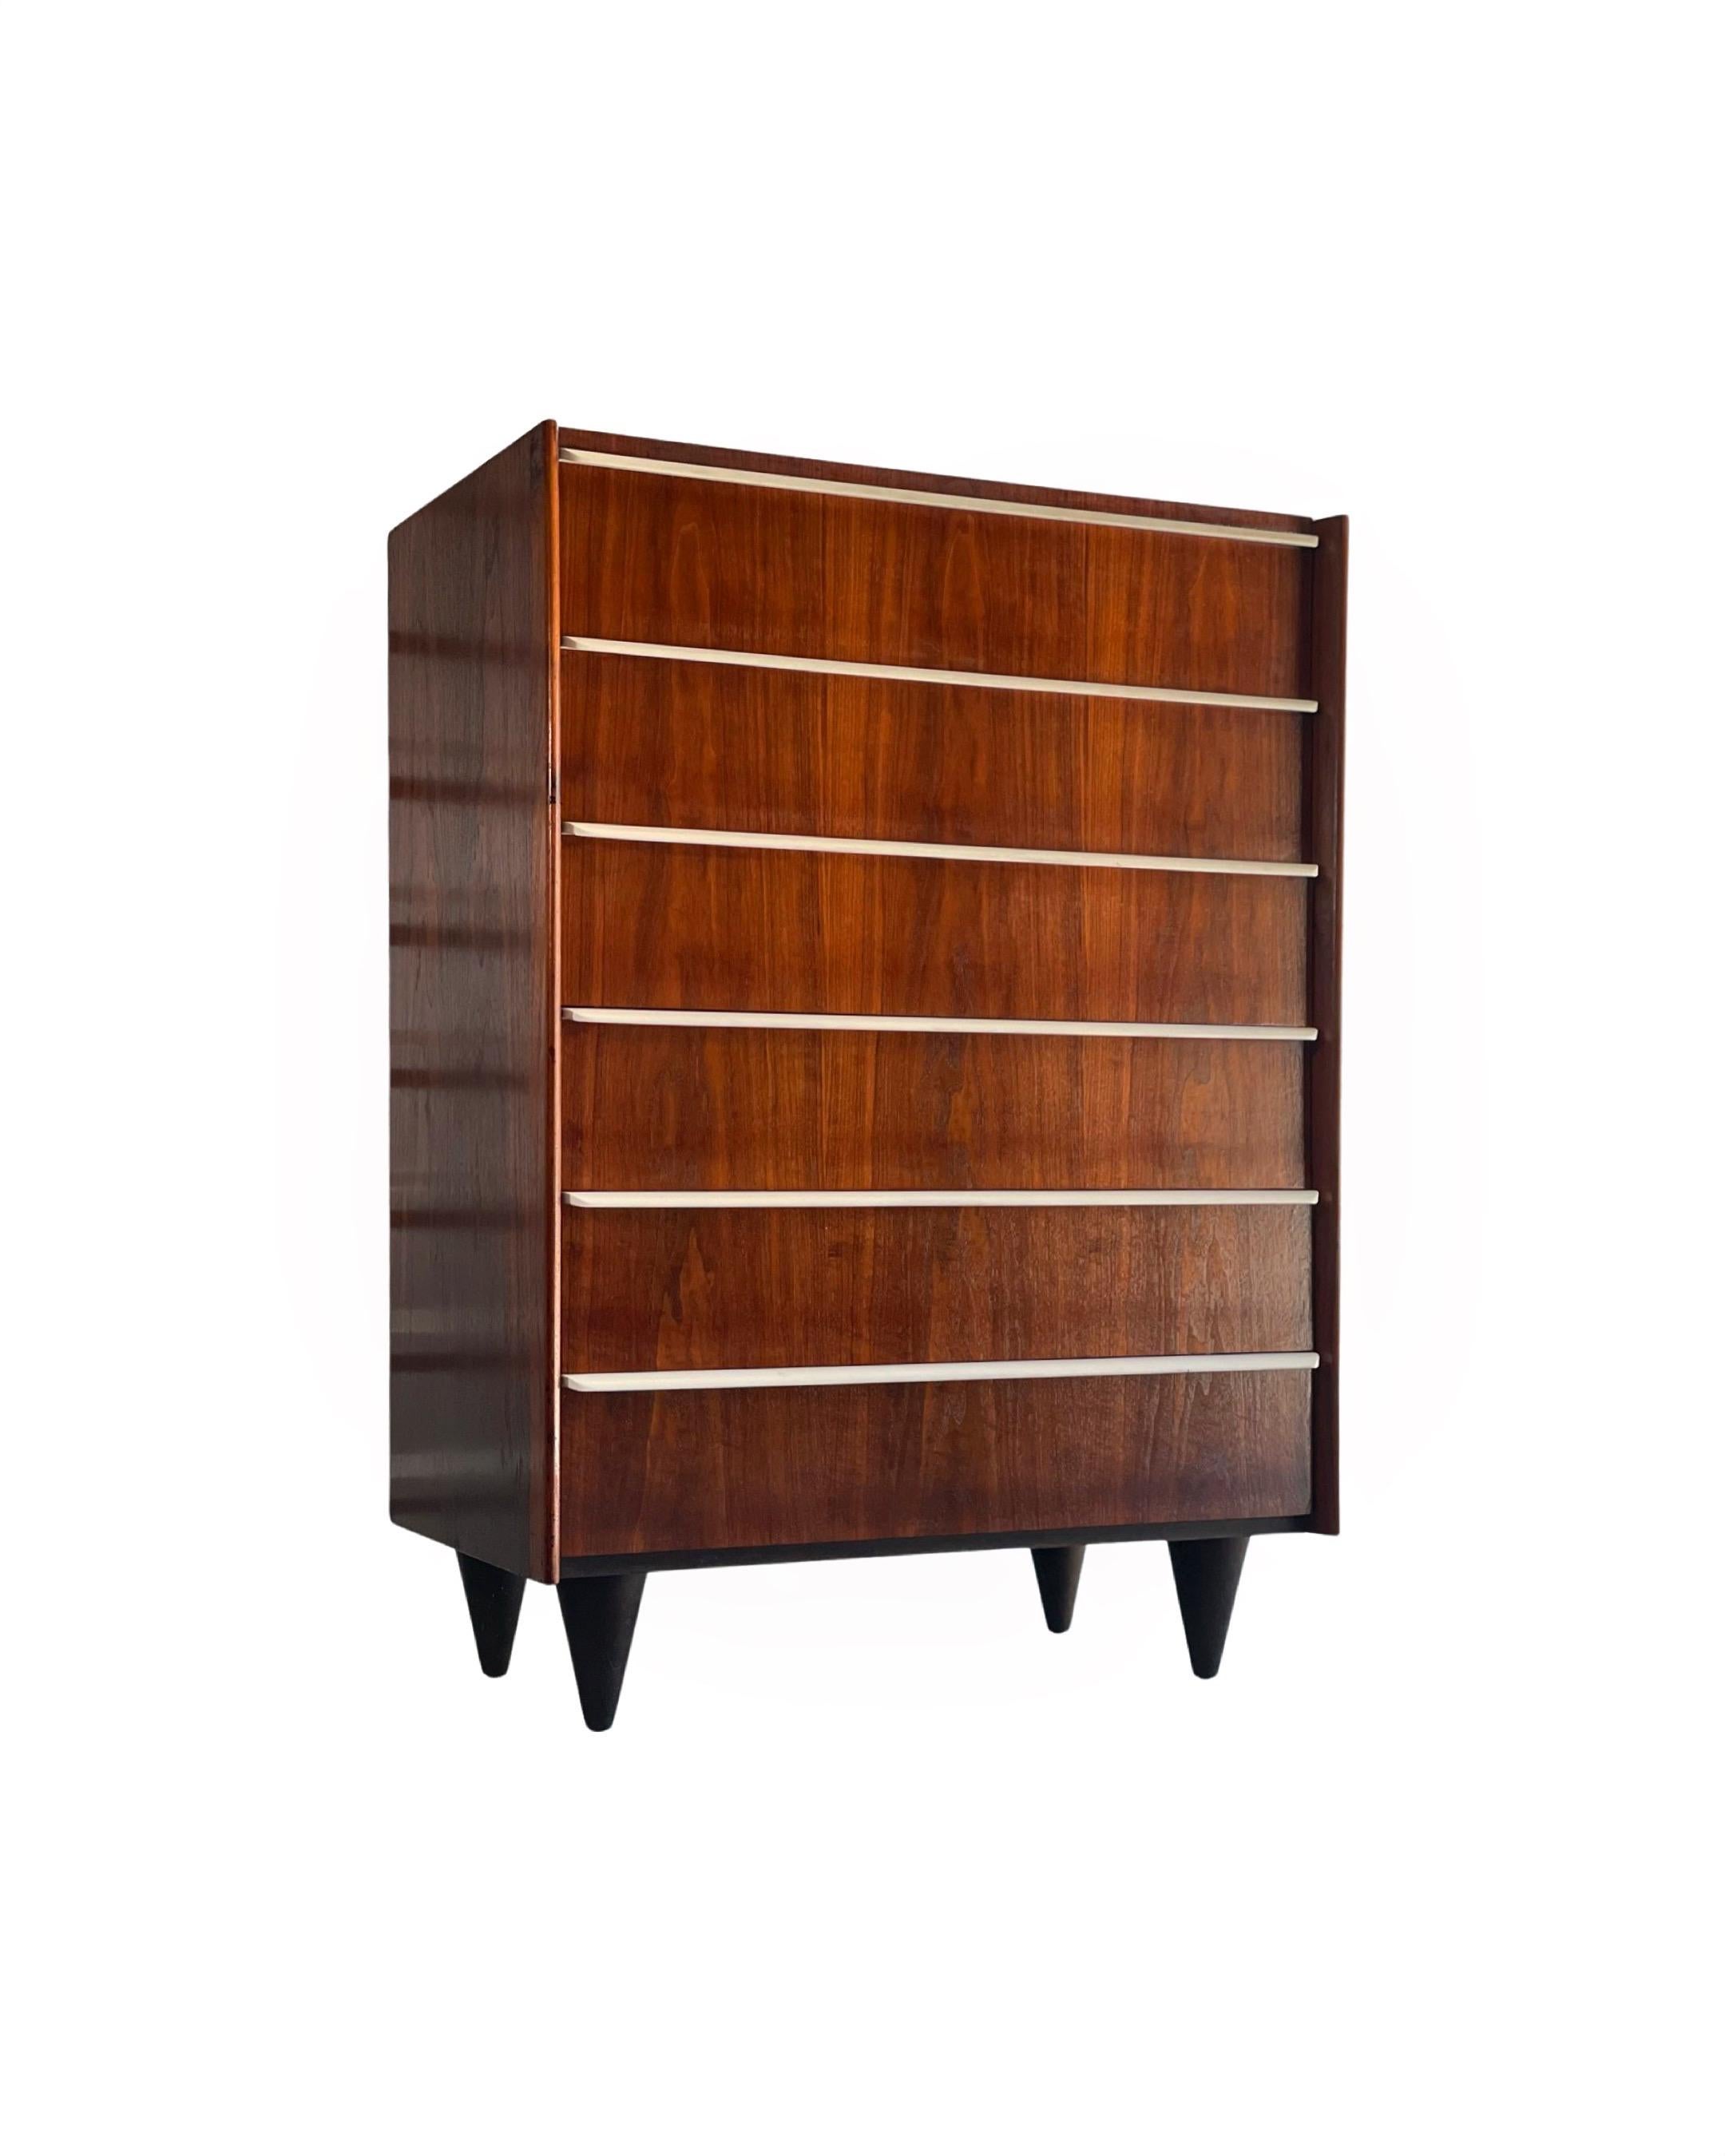 Rare six drawer tall chest by Gilbert Rohde for Herman Miller, circa 1948. Cathedral book matched walnut grain on the drawer facades juxtaposed with original creamy white drawer pulls. Hard to find example of Rohde's transition to more a modern